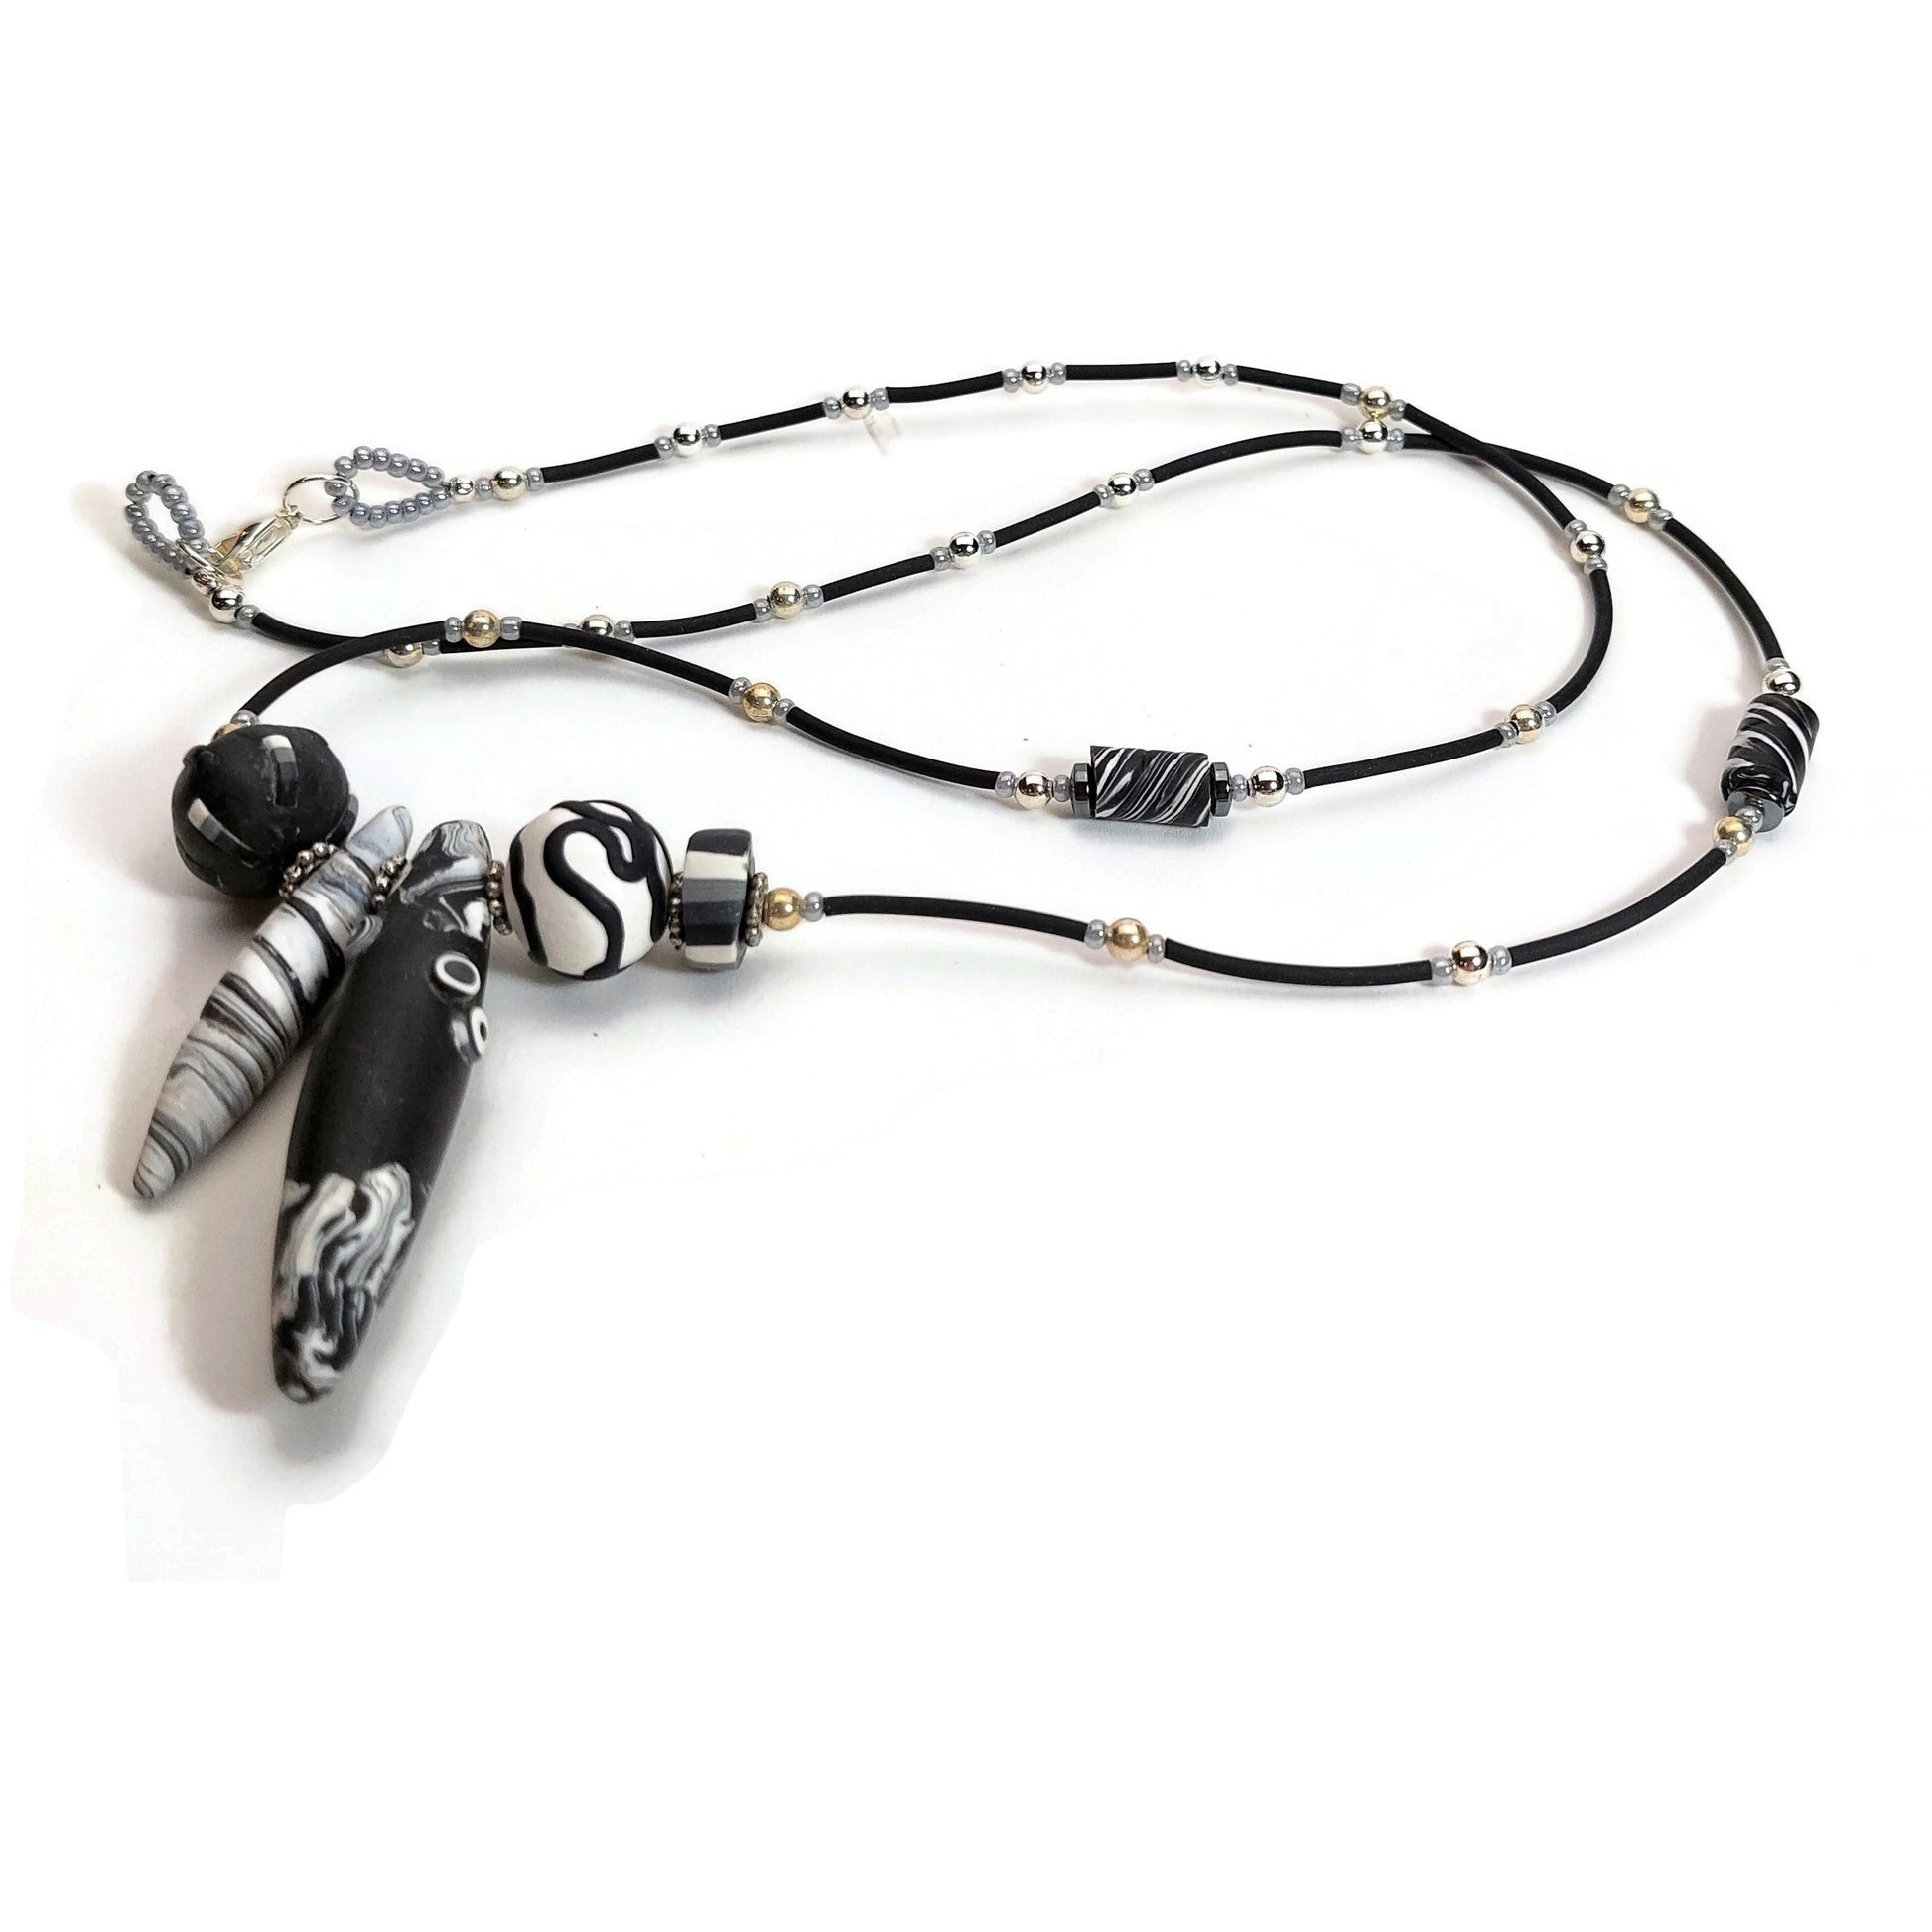 Black and white polymer clay necklace with silver-filled lobster clasp on white background